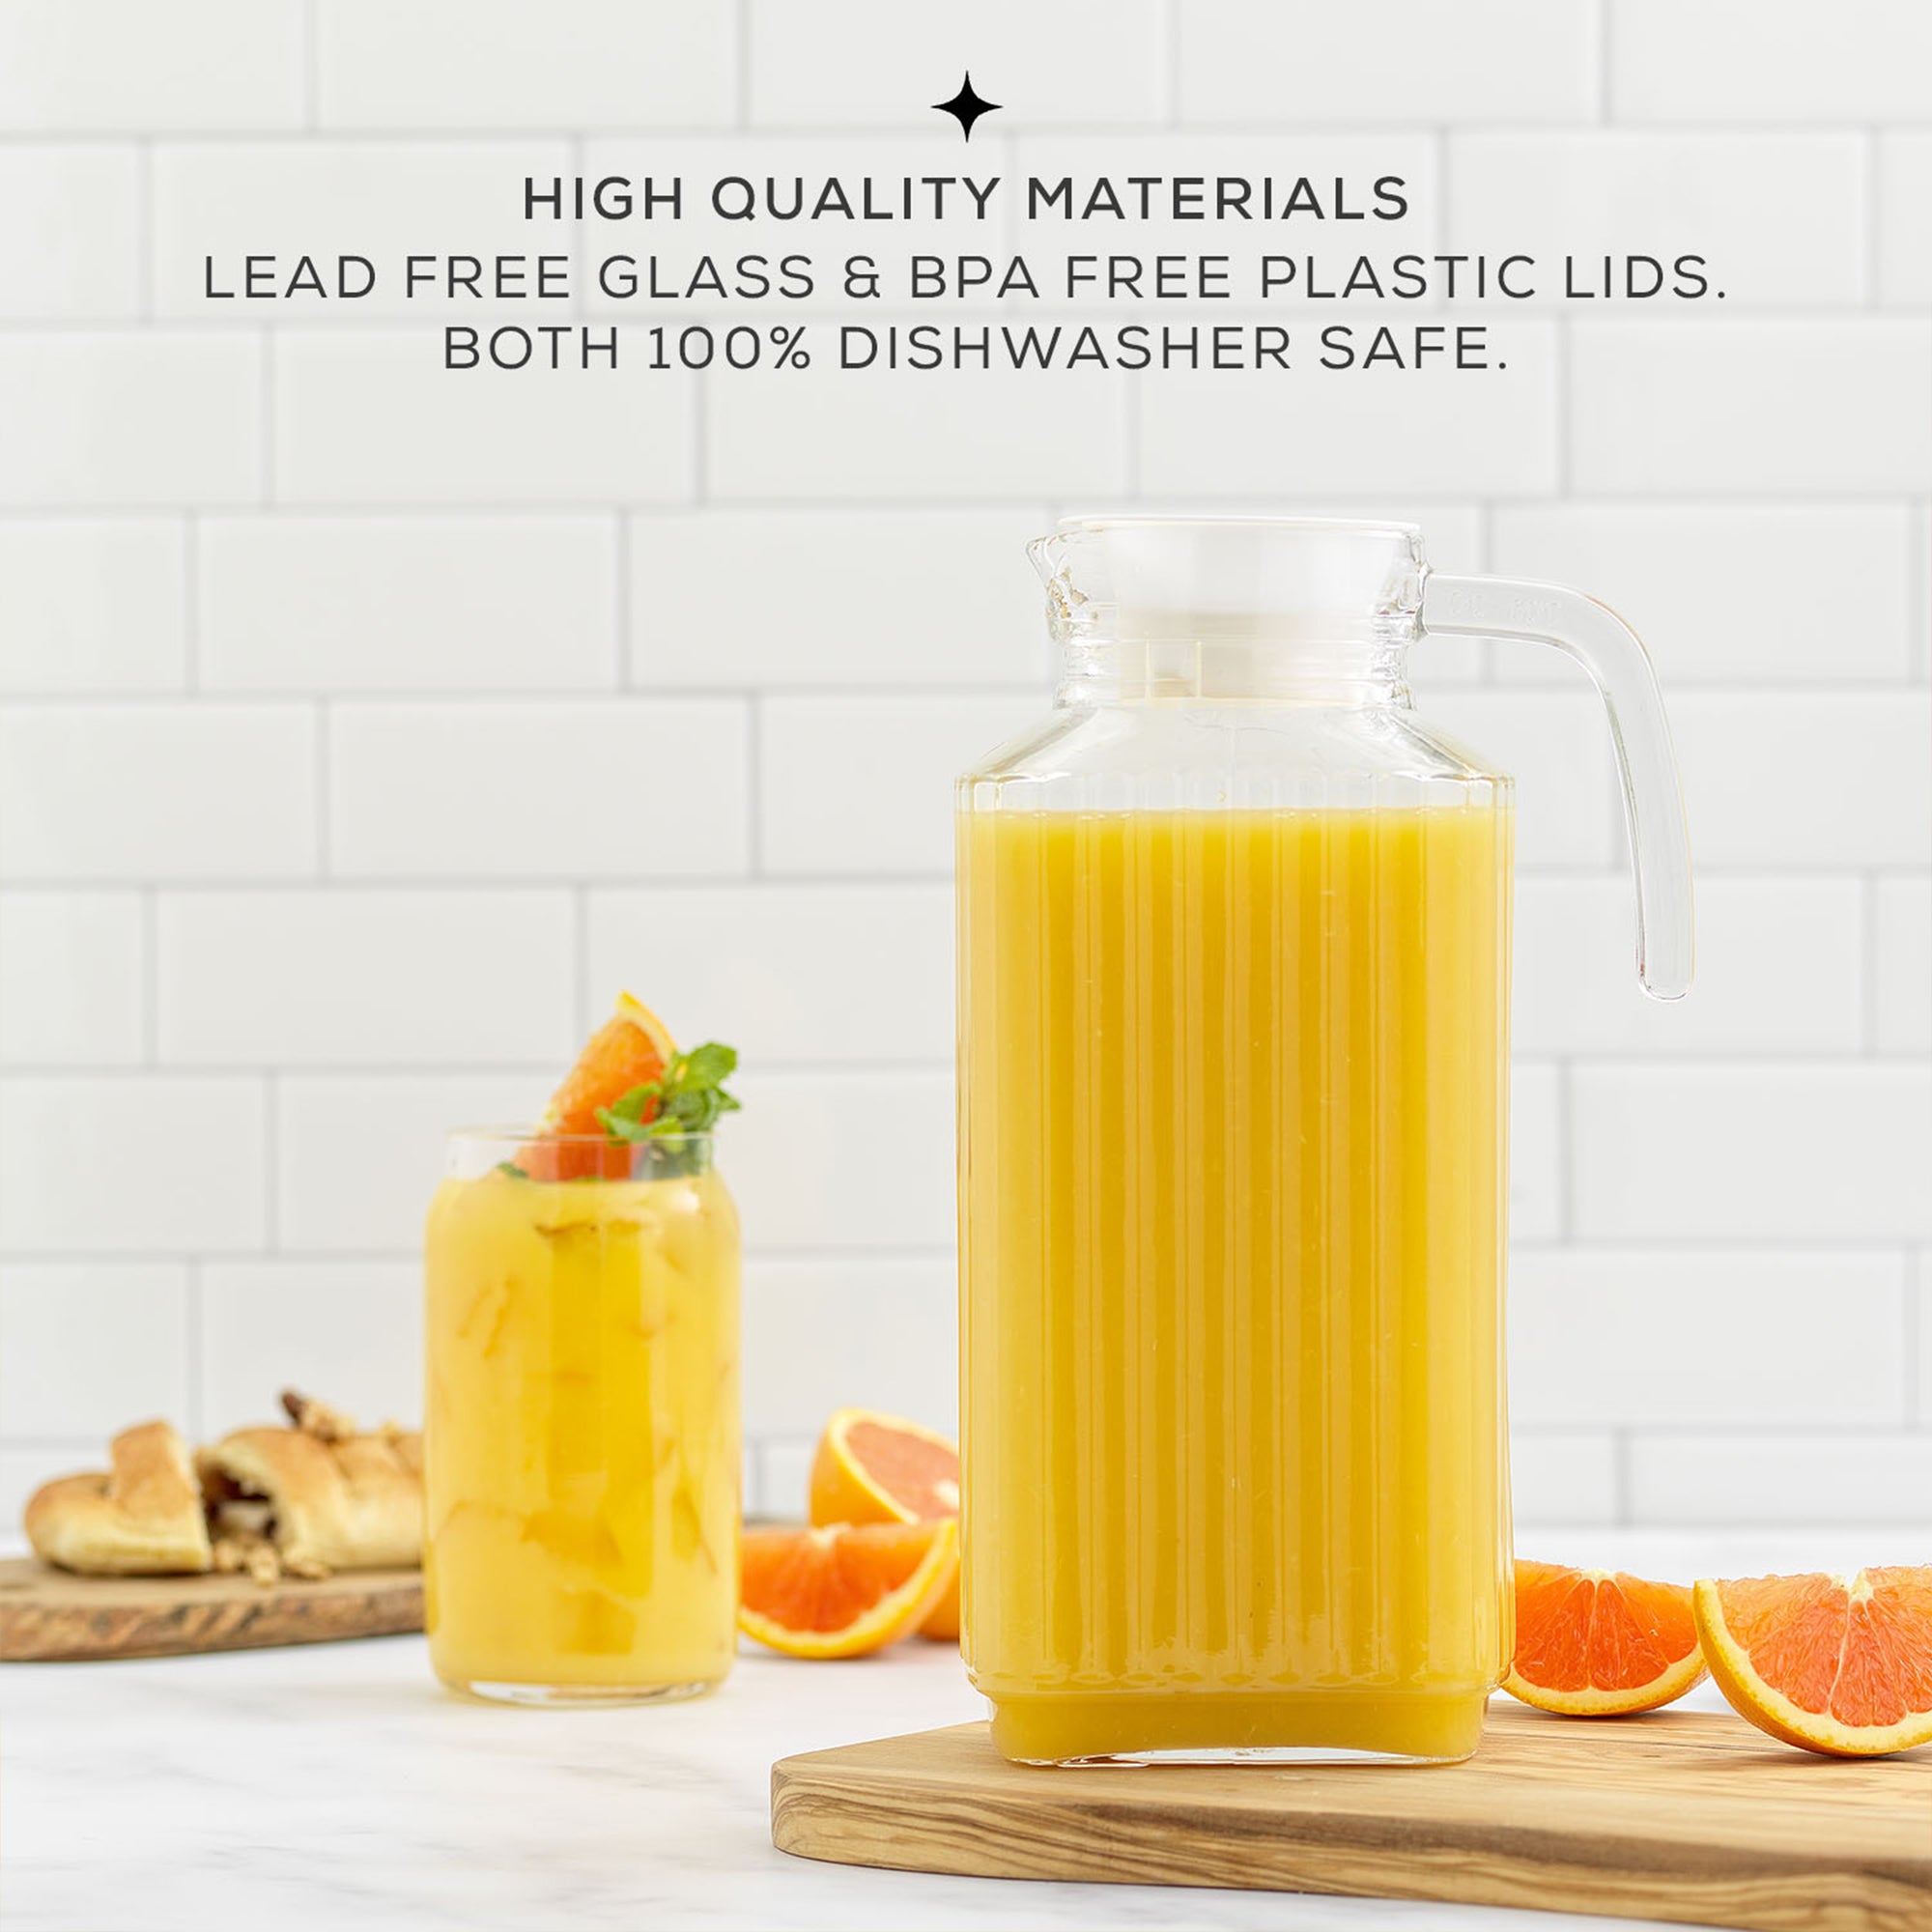 A 60-ounce JoyJolt Beverage Serveware Glass Pitcher filled with orange juice sits on a table. The pitcher has a clear glass body and a handle for easy pouring. Text on the image reads “HIGH QUALITY MATERIALS. LEAD FREE GLASS & BPA FREE PLASTIC LIDS. BOTH 100% DISHWASHER SAFE.”